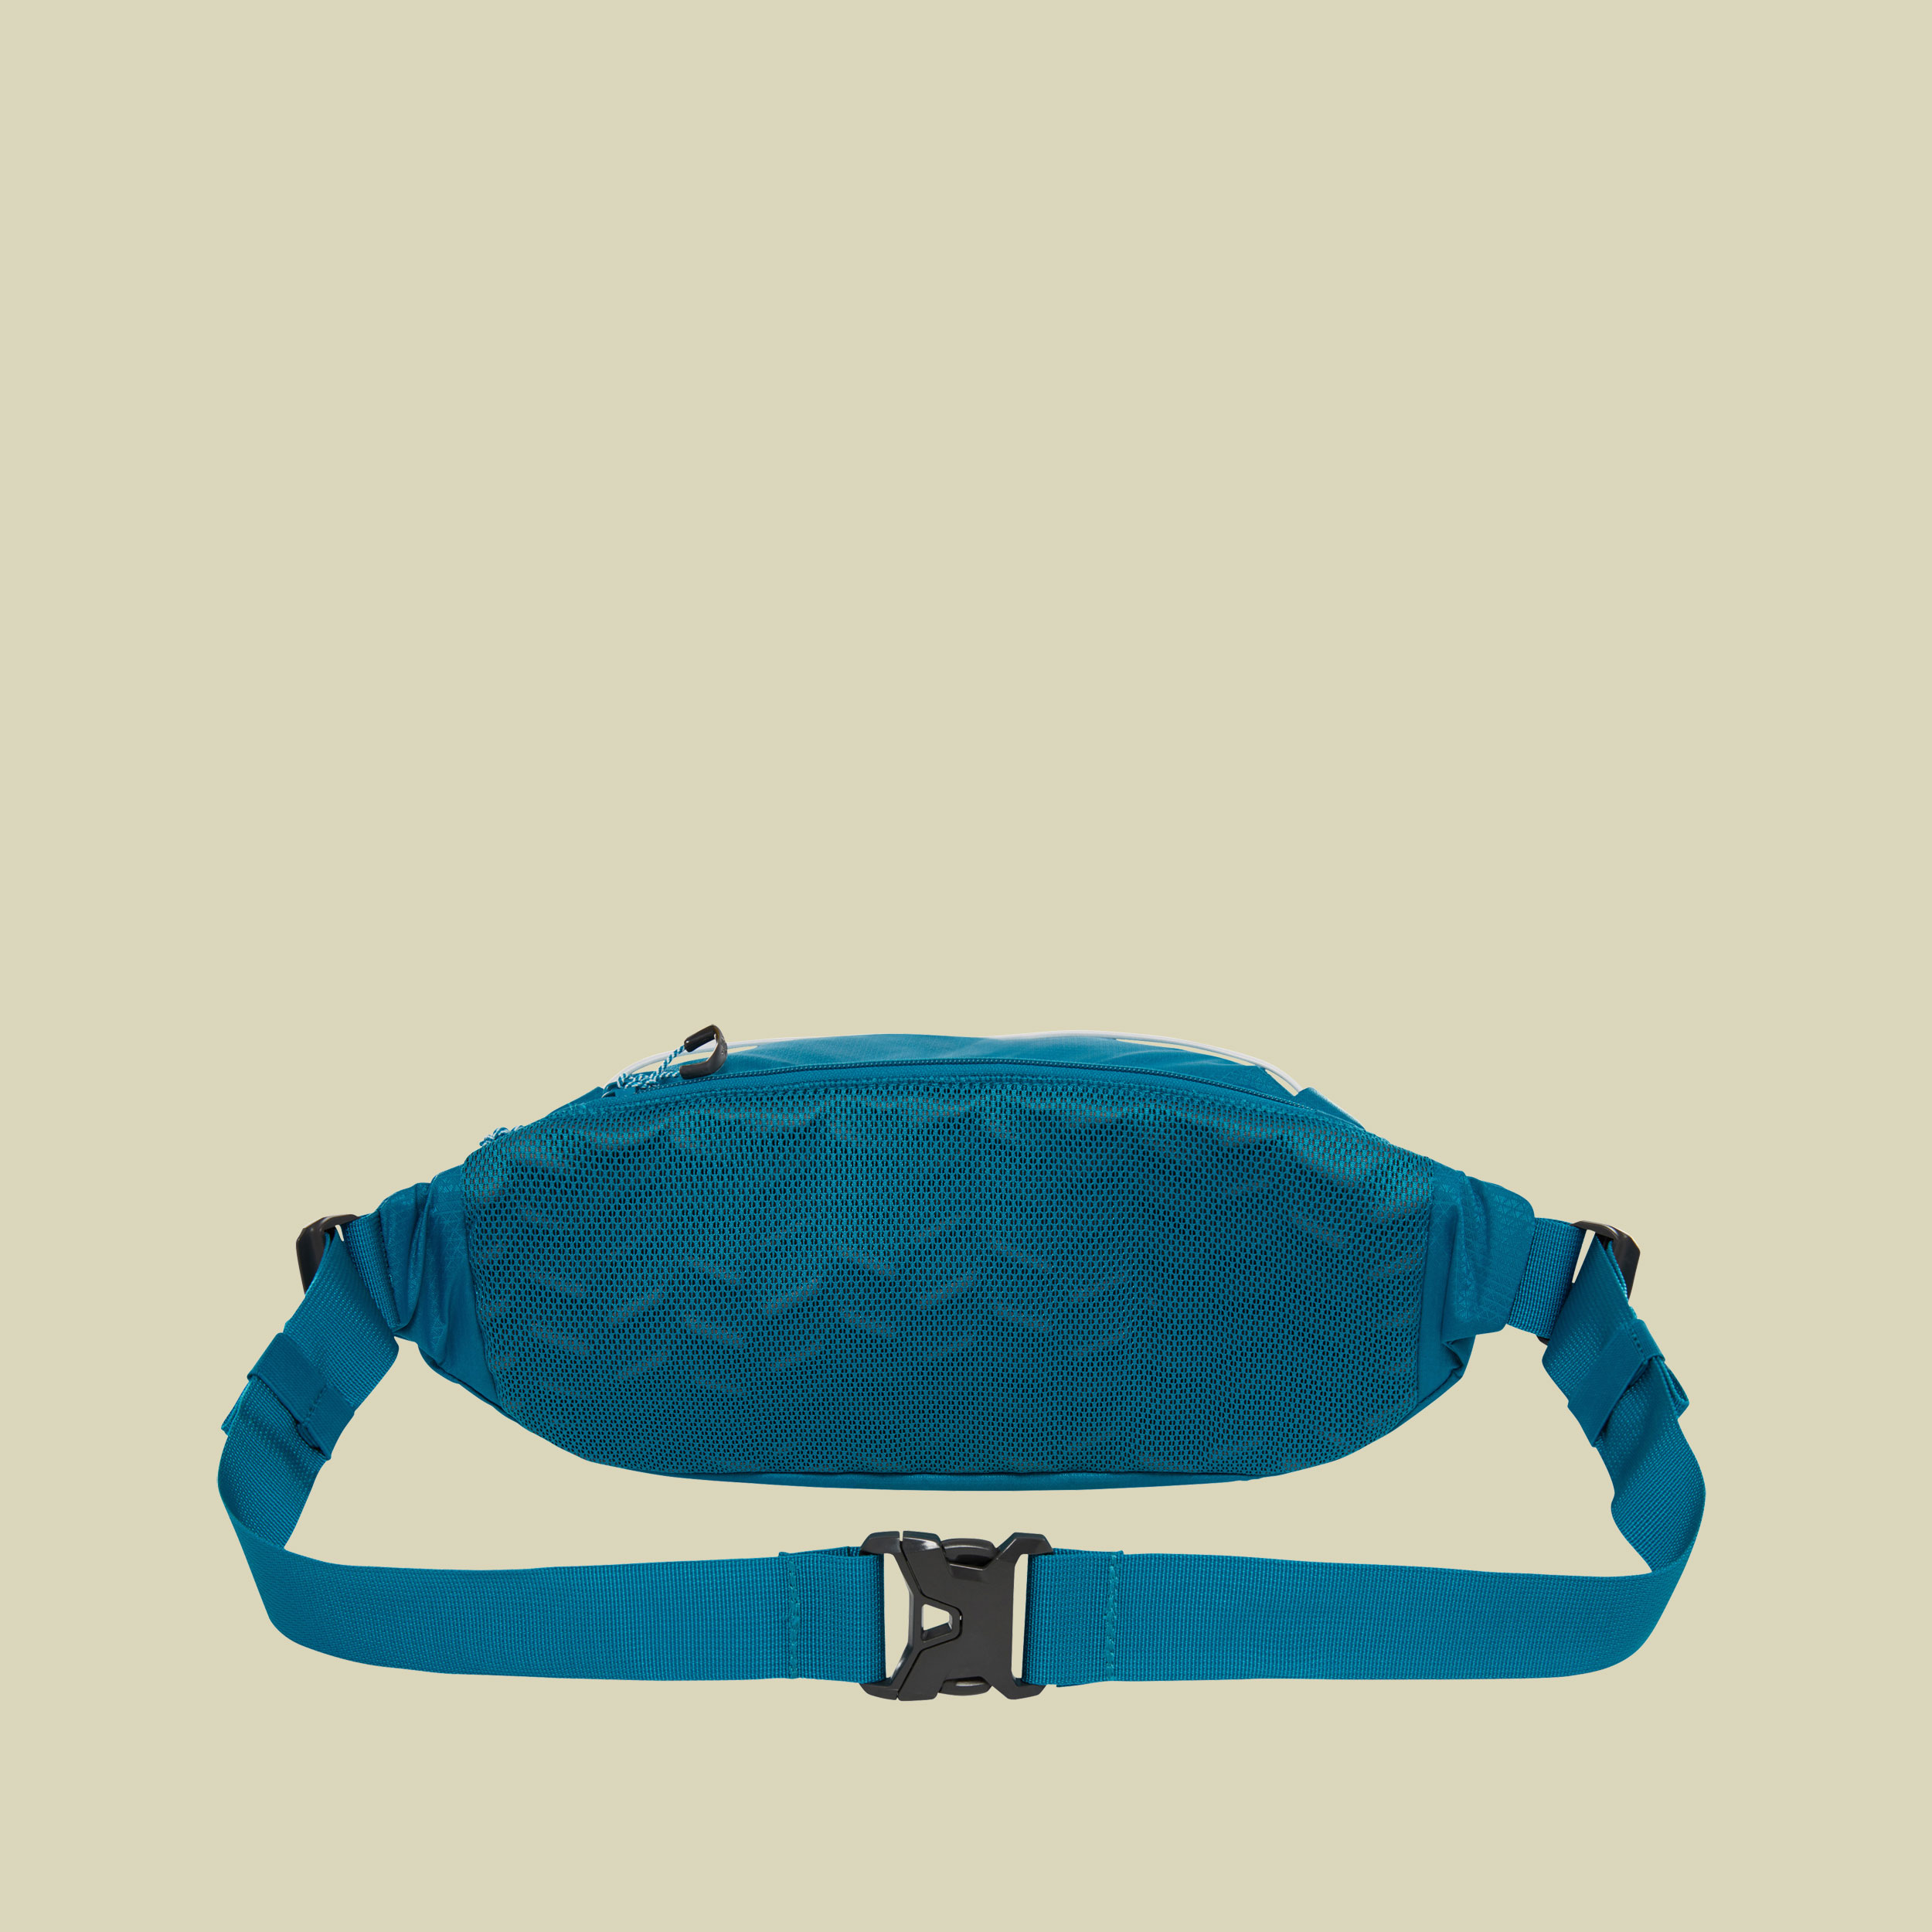 Lumbnical Größe S Farbe crystal teal/TNF white